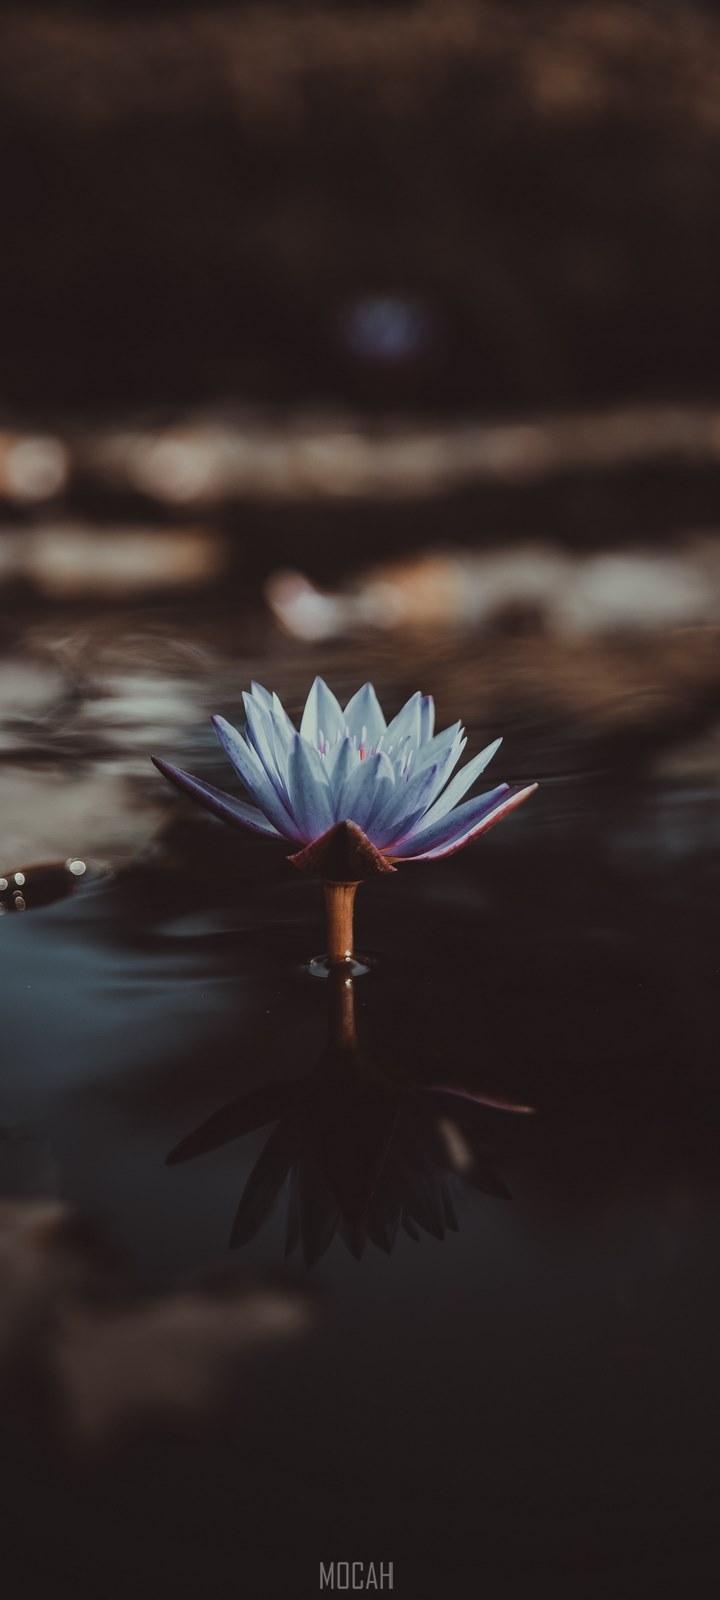 HD wallpaper, A Light Violet Water Lily Jutting Out From The Surface Of Water, Realme Narzo 10A Wallpaper Download, 720X1600, Scared To Be Lonely